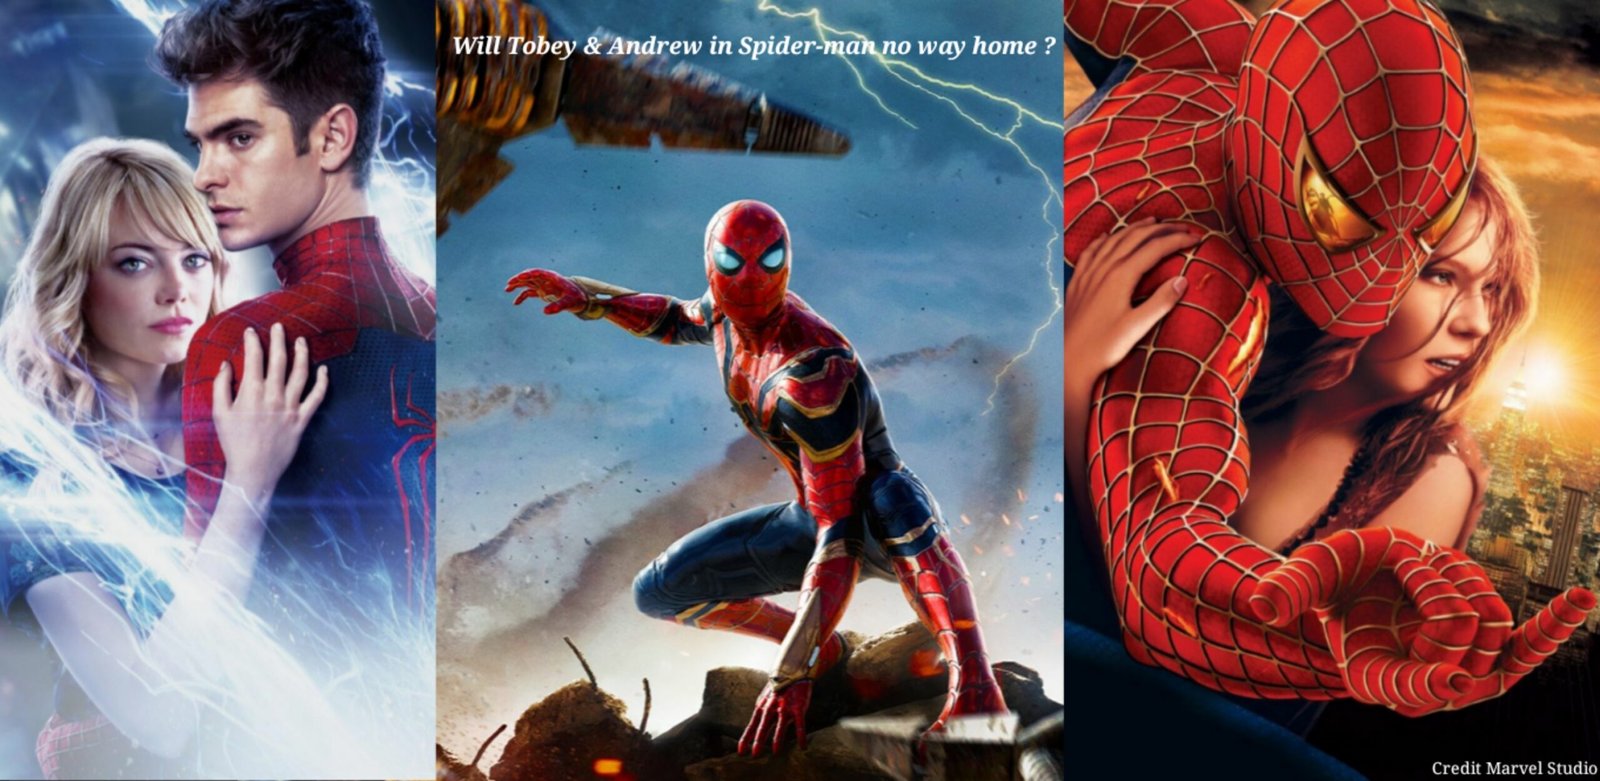 Spider man No way Home Tom Holland , Tobey Maguire & Andrew Garfield as Peter Parker / Spider-Man (Credit Sony Picture & Marvel Studios)